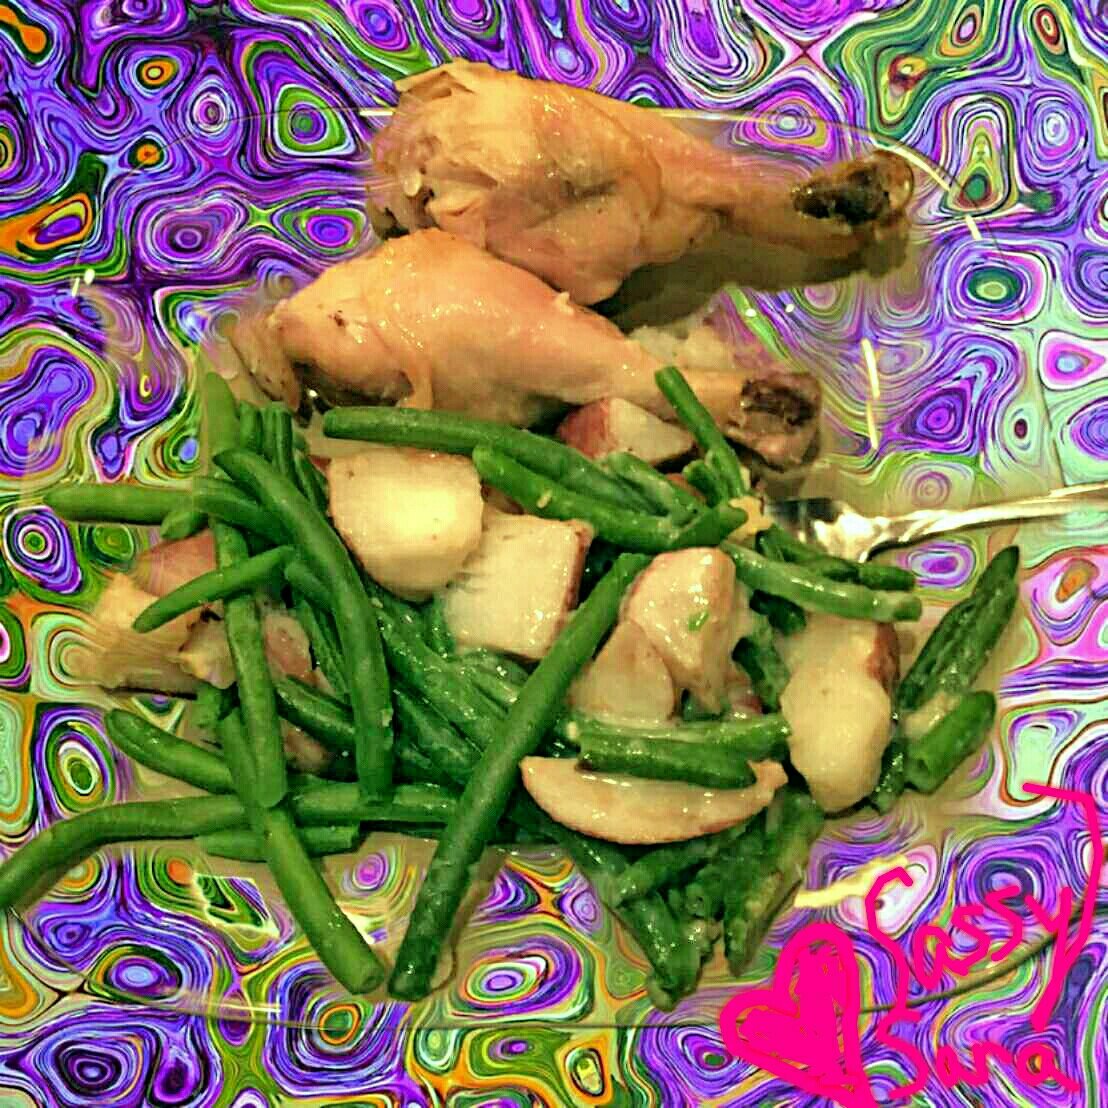 I made chicken dinner at my friend's place yesterday(Friday)!💗#dinner #dinnerideas #dinnertime #yummy #delicious #deliciousfood #homemadedinner #mouthwateringfood #mouthwatering #delish #abstractart #abstract #abstractart_daily #abstractobsession #Foodies #foodphotography #food